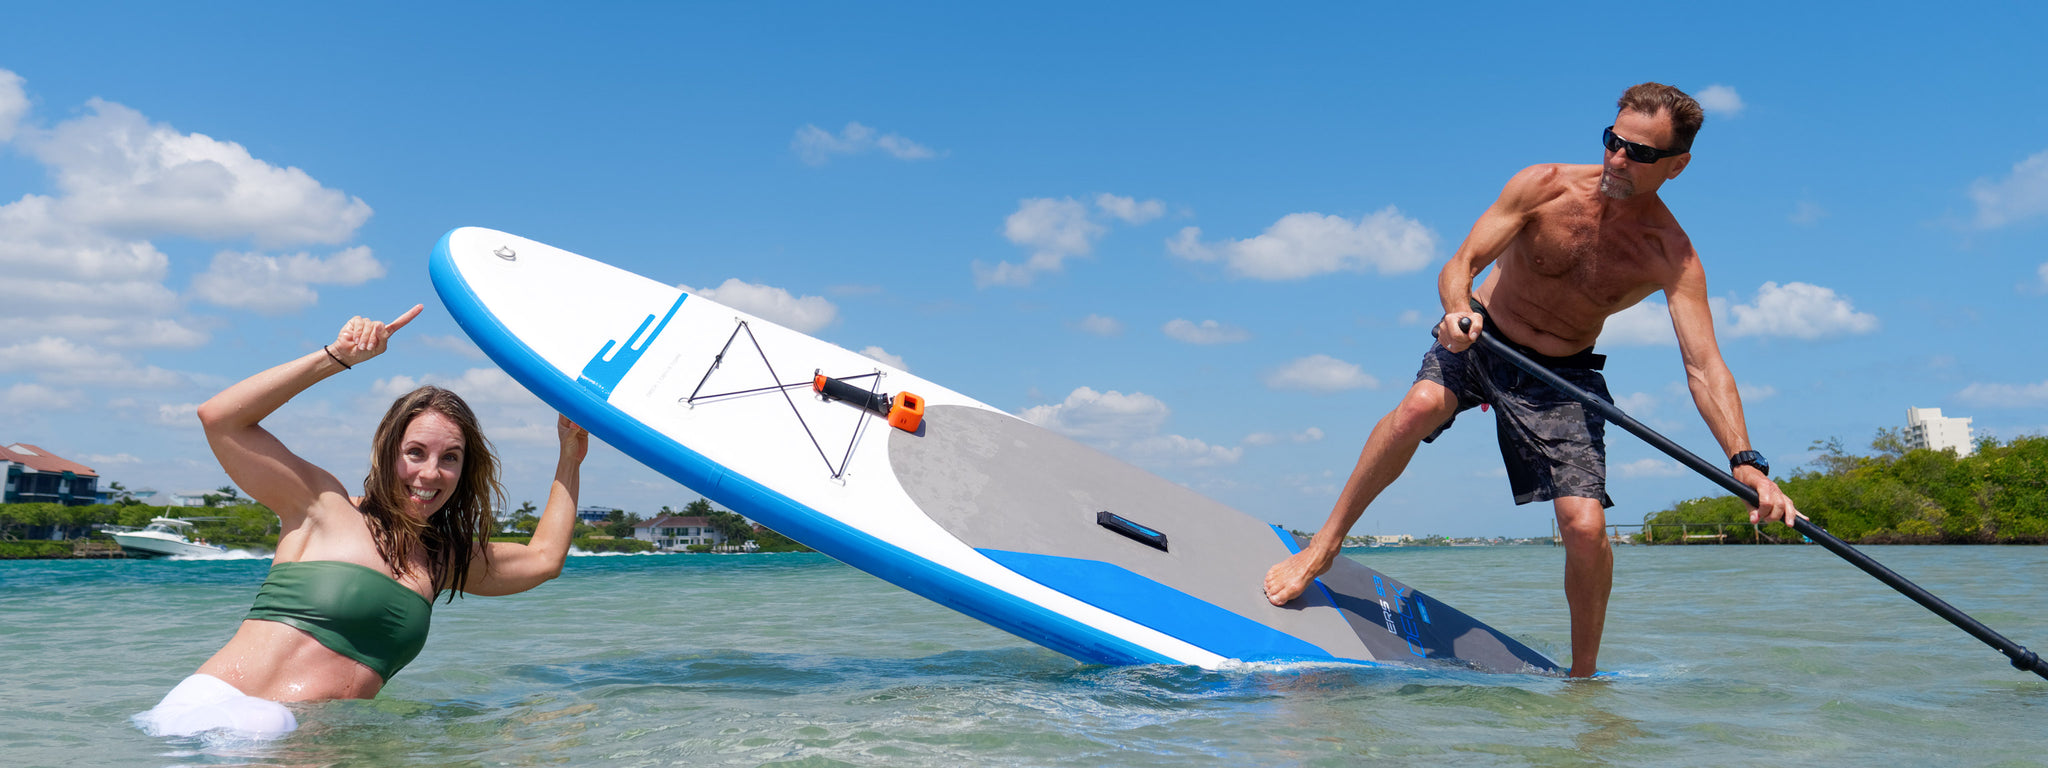 A Beginner's Guide To Choosing A Paddle Board